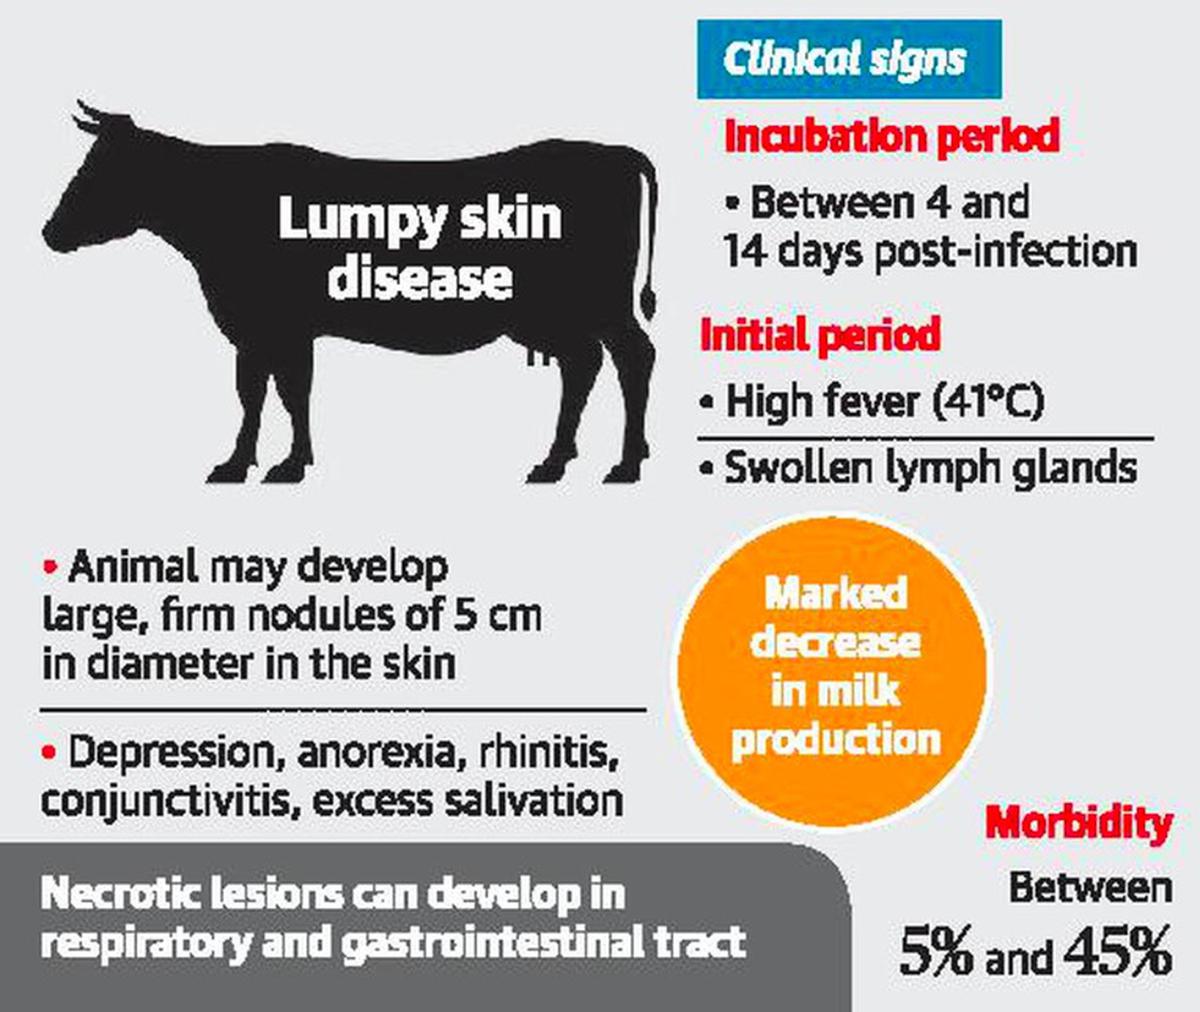 Explained | What is lumpy skin disease in cattle? Does it affect milk we consume? - The Hindu